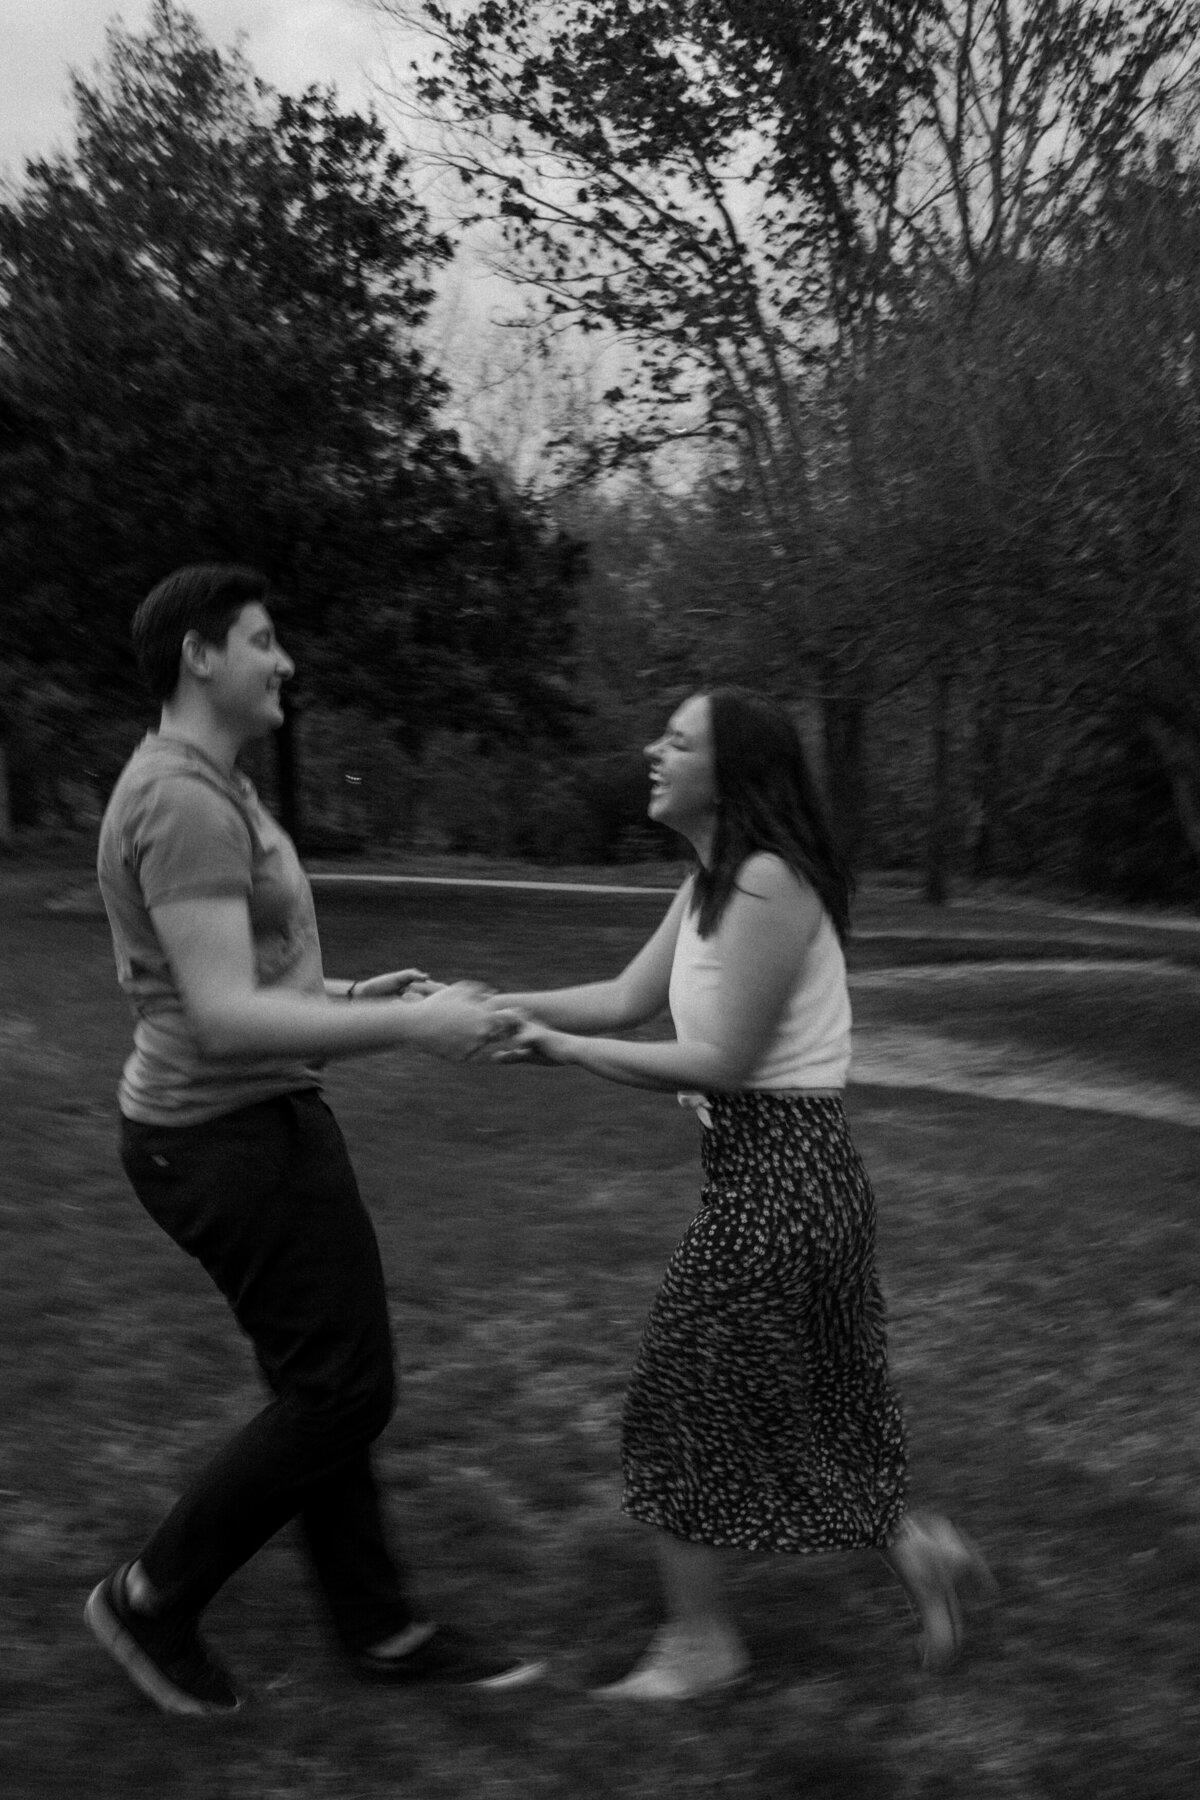 A black and white image capturing a carefree couple dancing in an open field, with blurred motion